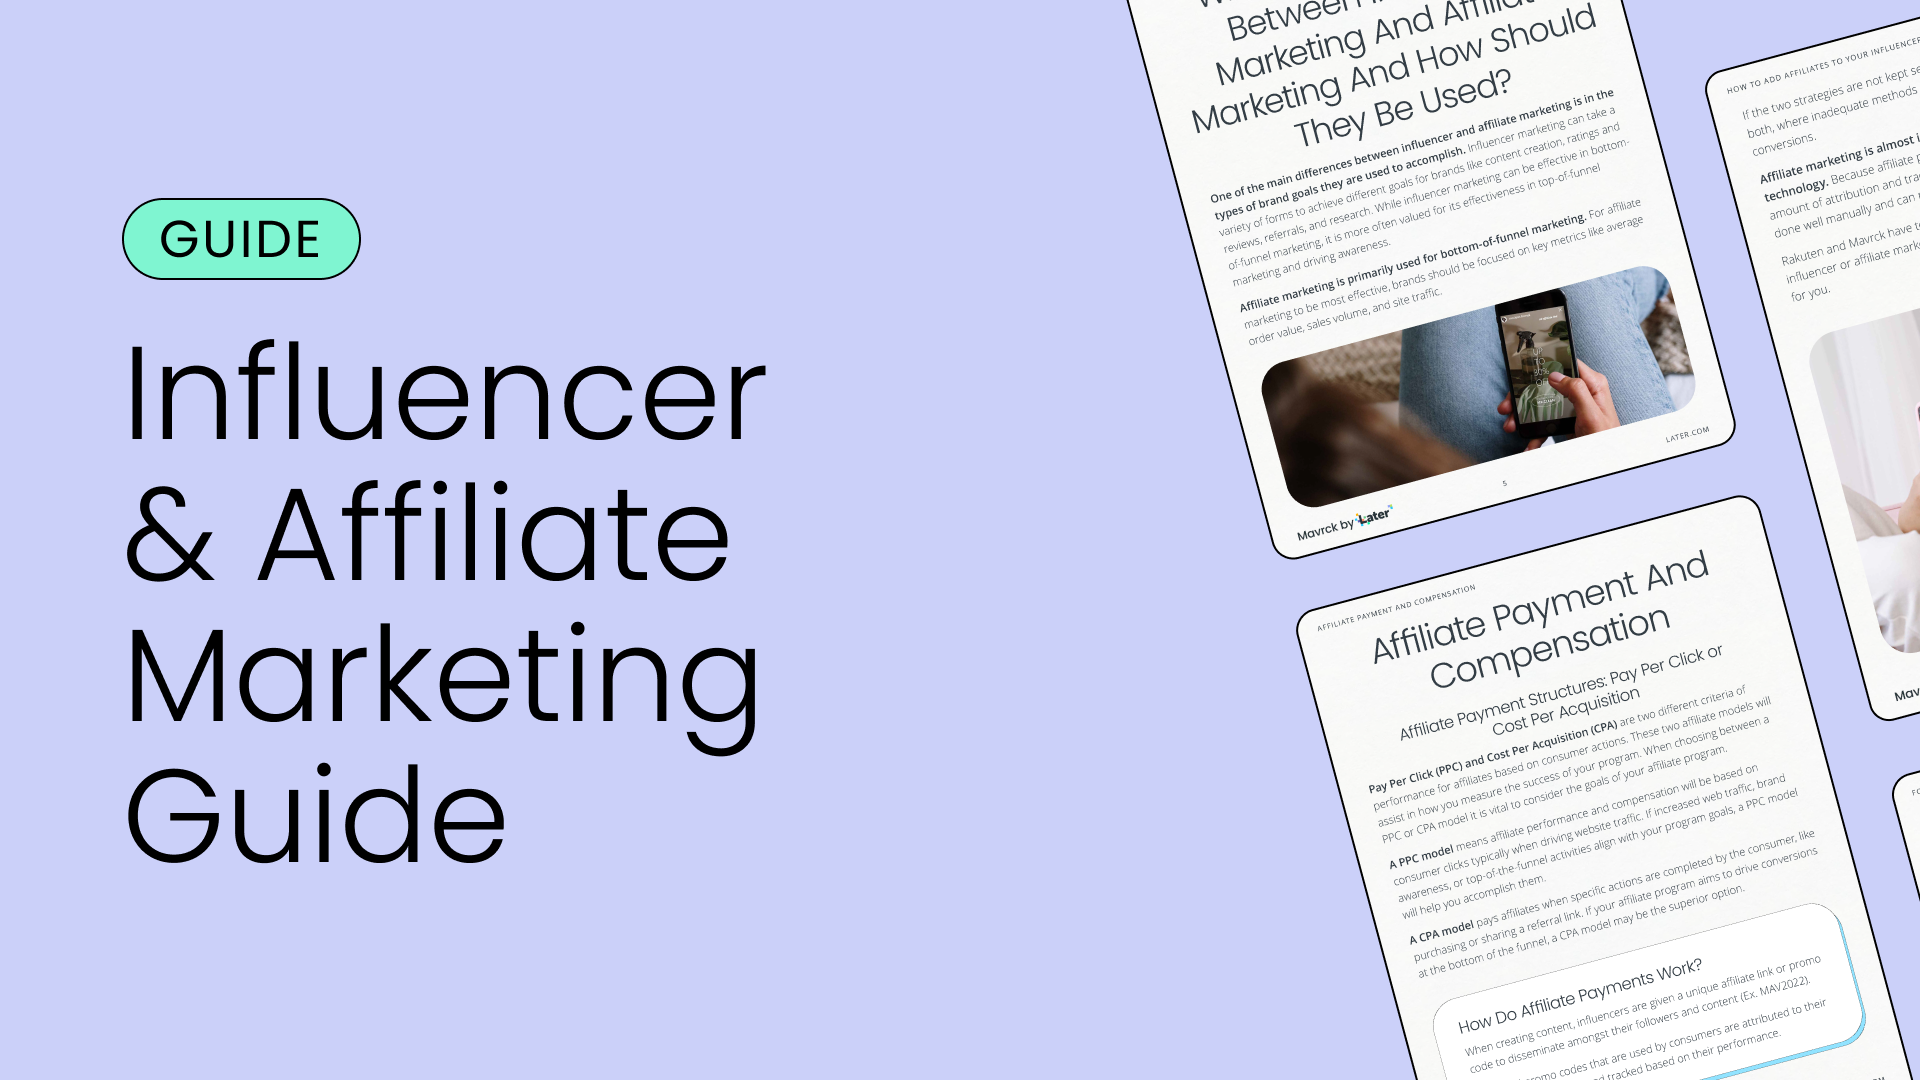 Free influencer marketing and affiliate marketing guide for brand marketers from Later.